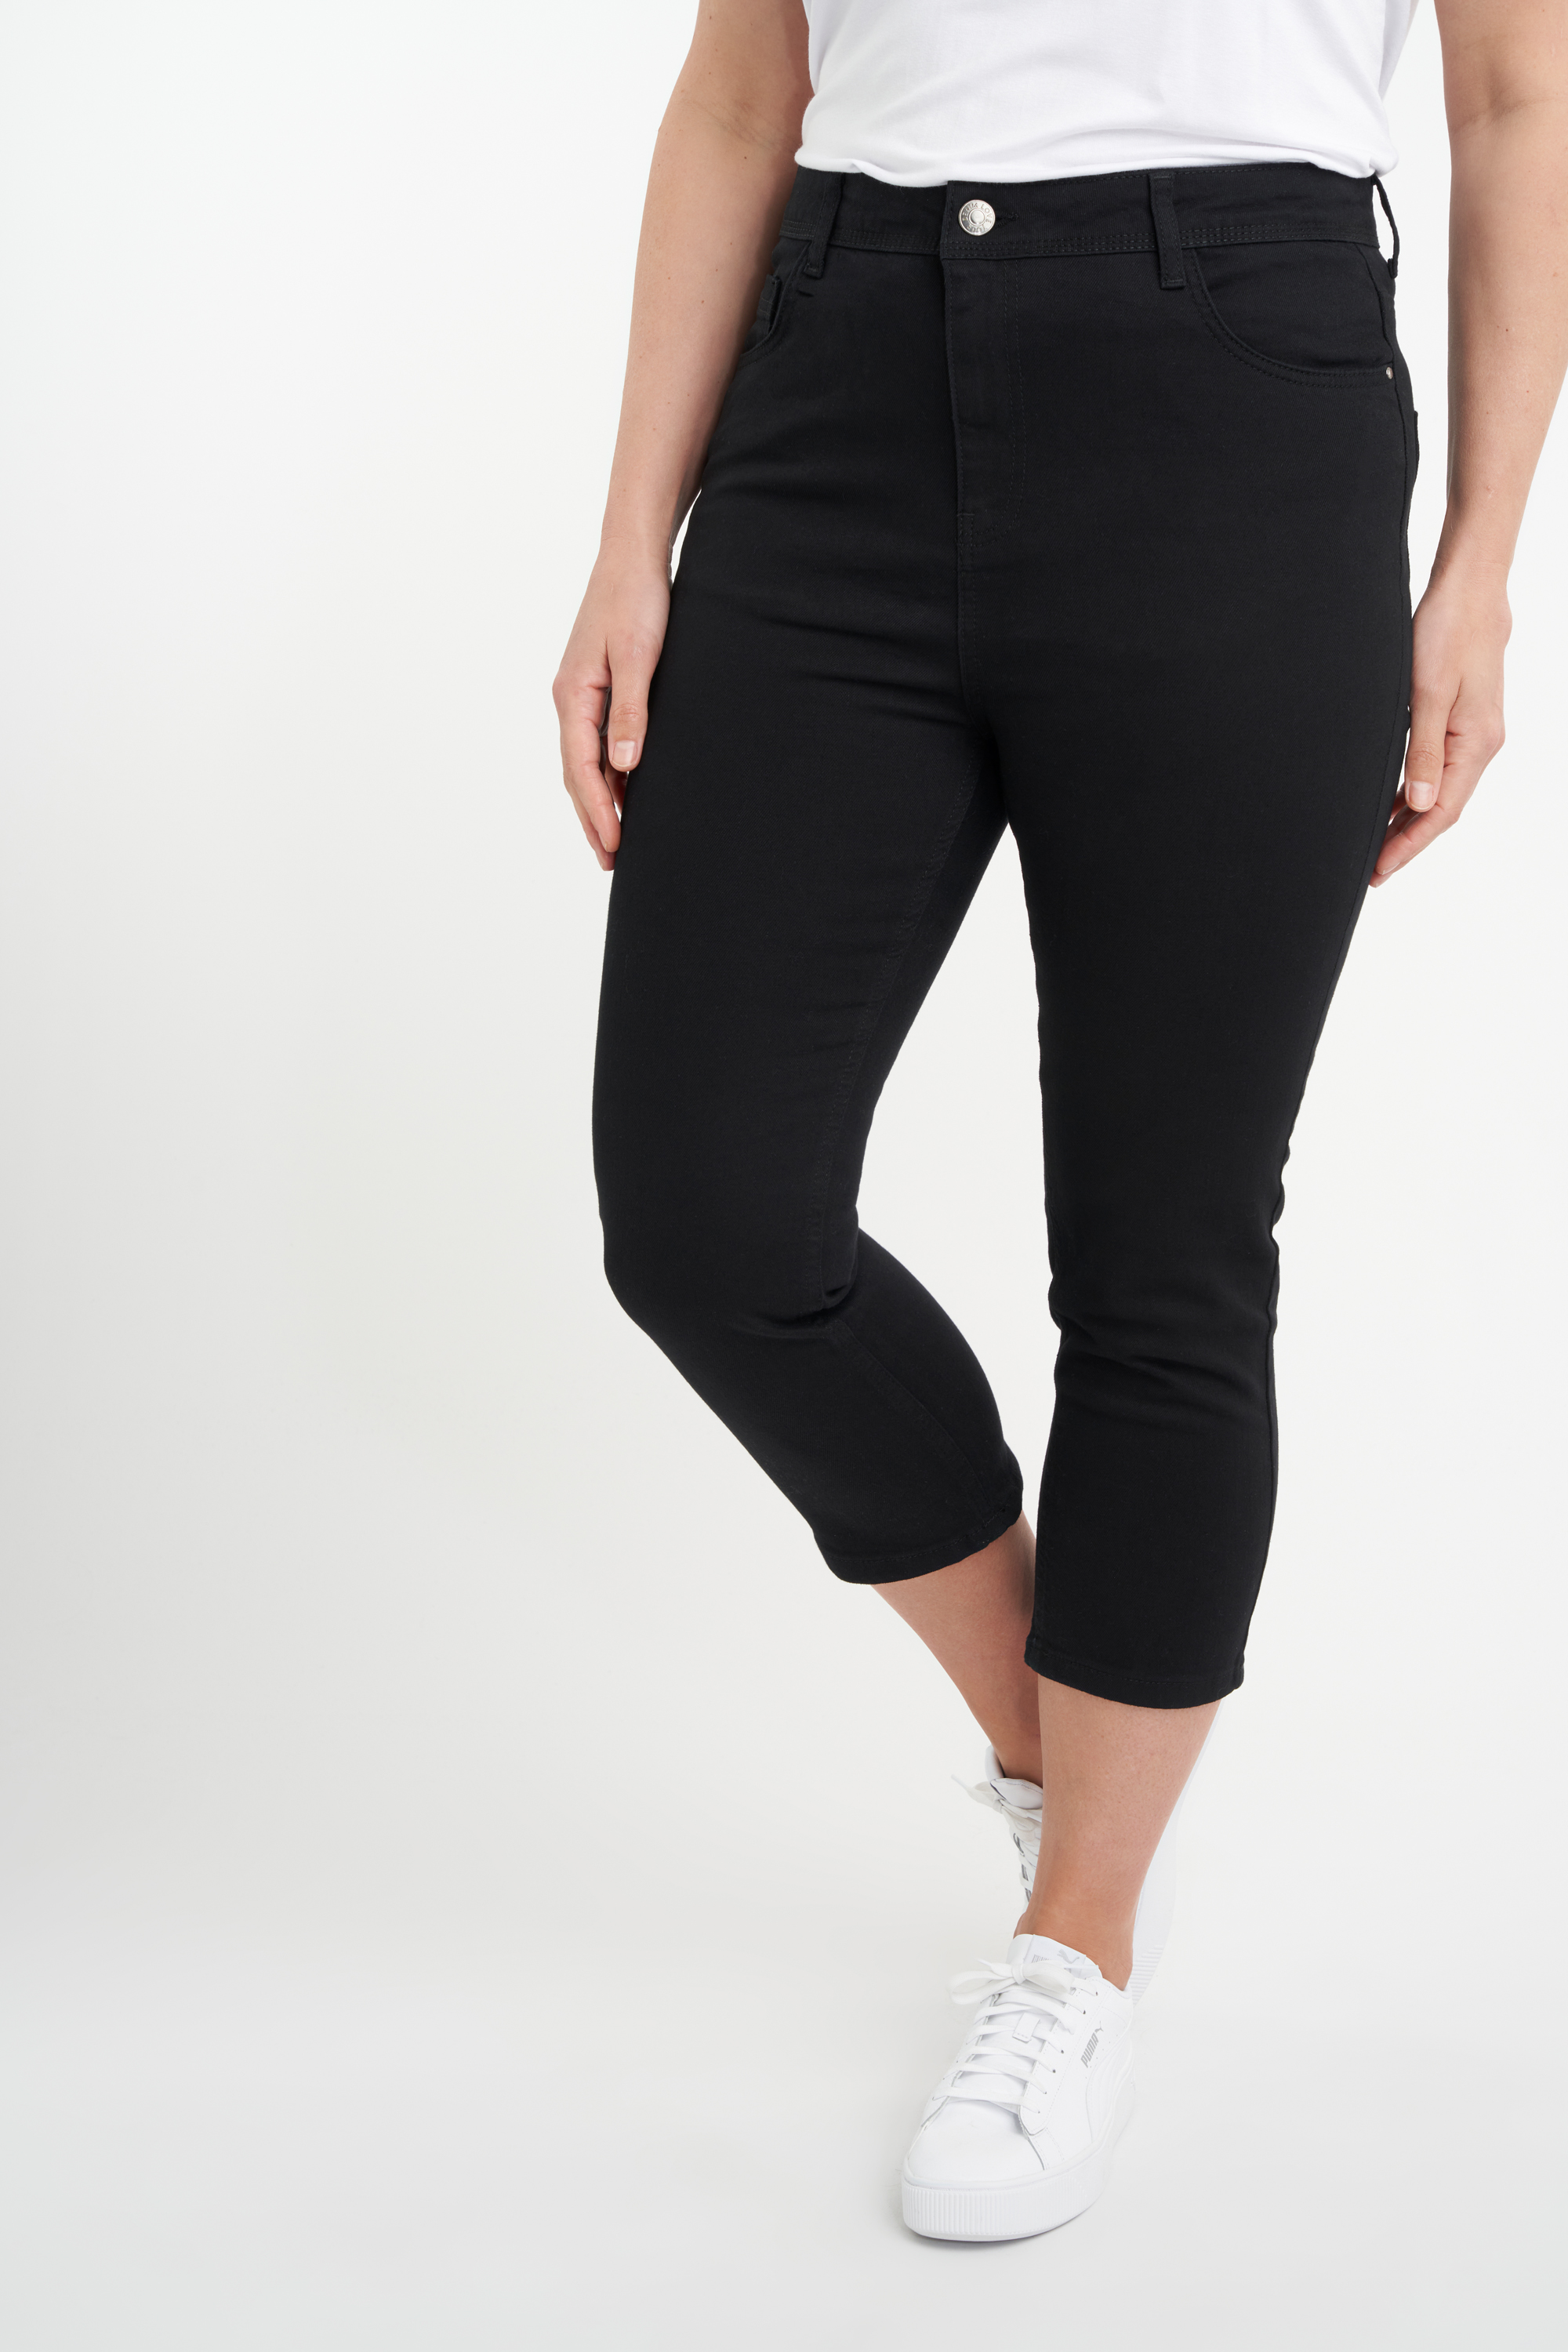 3/4 lange Skinny-Leg-Jeans mit hoher Taille CHERRY image 6